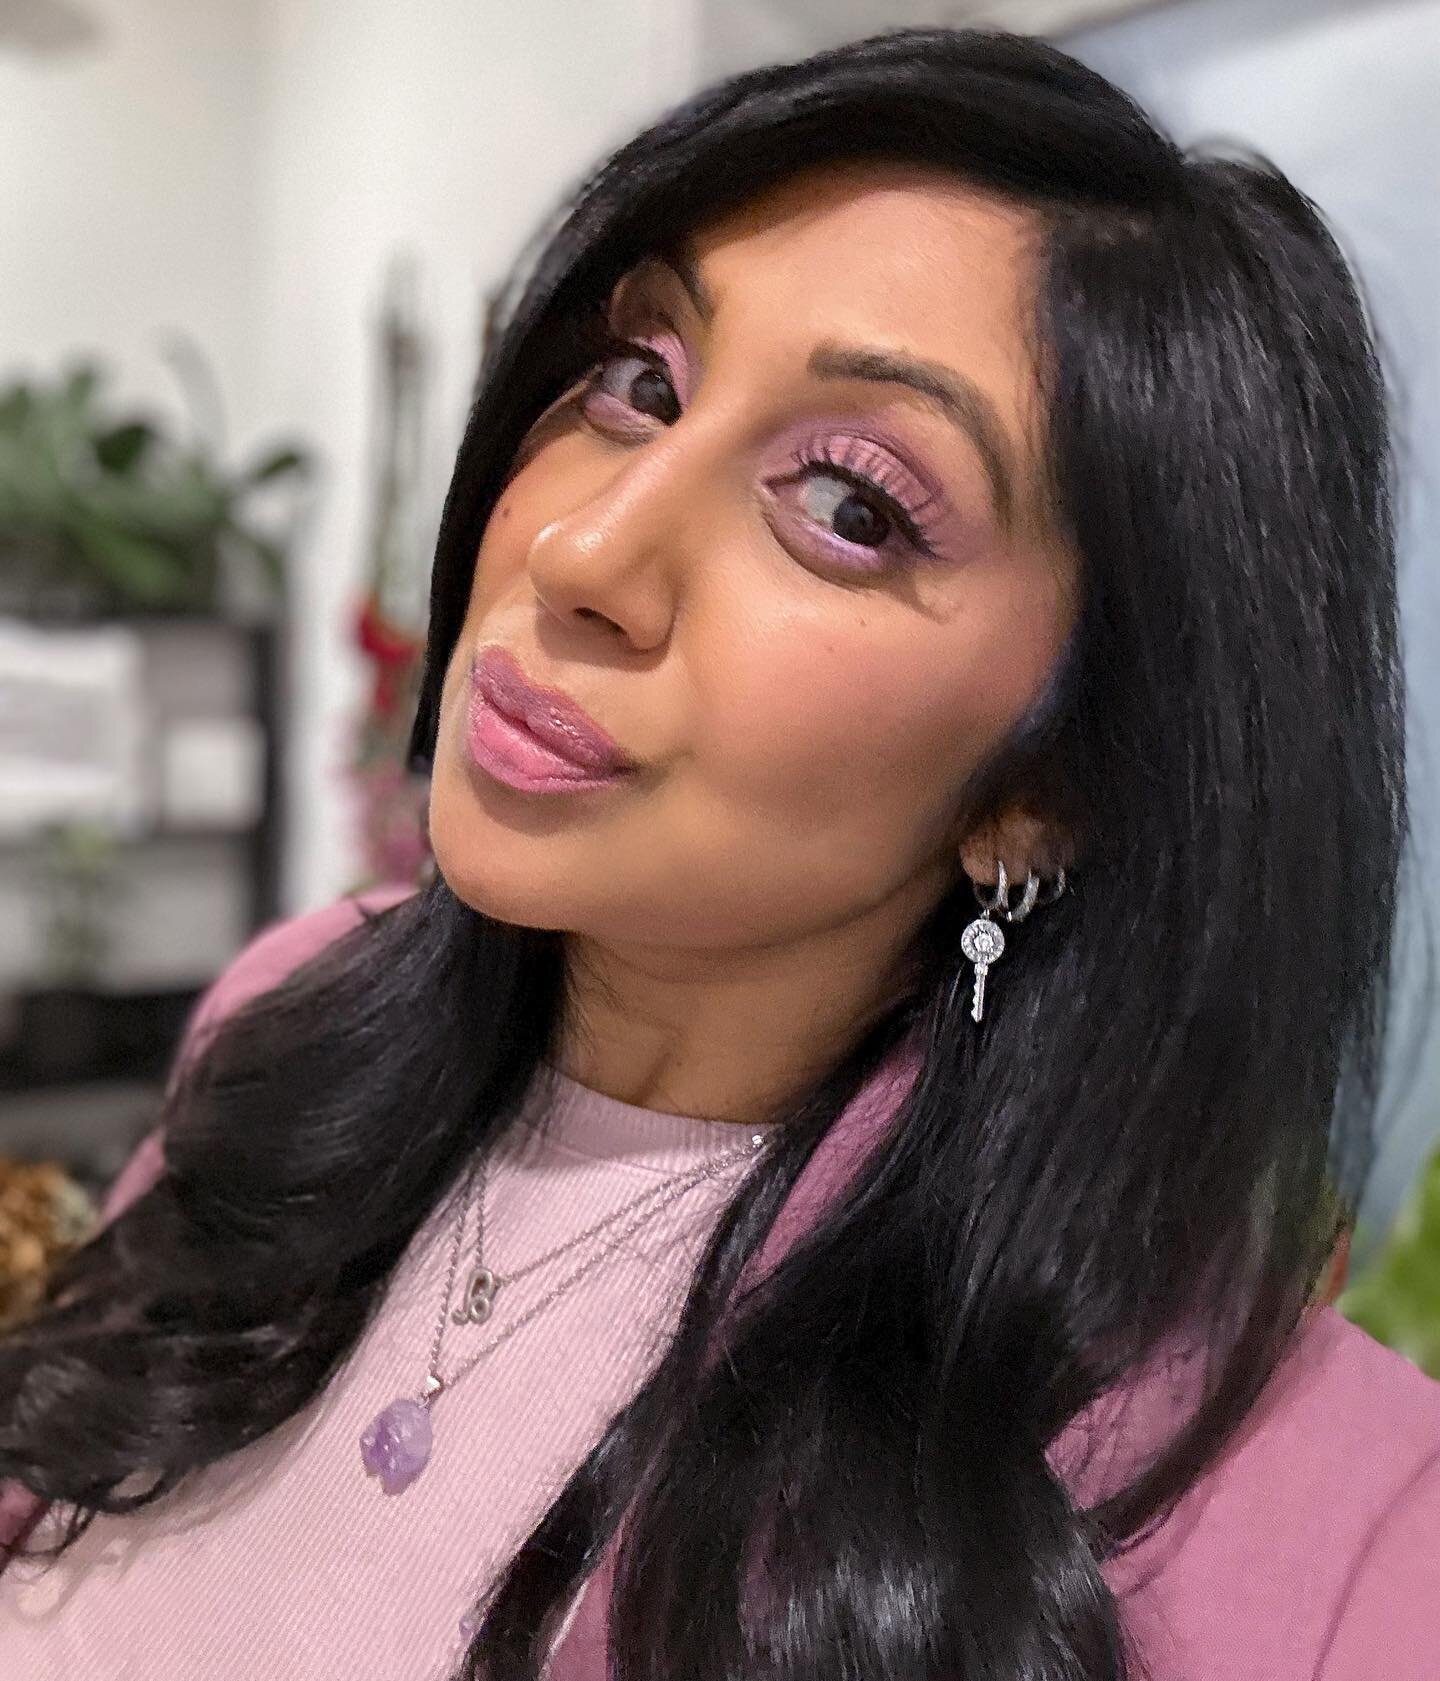 Soft glam look for Valentine&rsquo;s Day 💘 I&rsquo;m loving these mauve tones. Not your typical V-day tones but I did do a pink lip 💋 so ya I would rock this look for vday if I had plans 😂

I tried the new @urbandecaycosmetics Brow line and I real